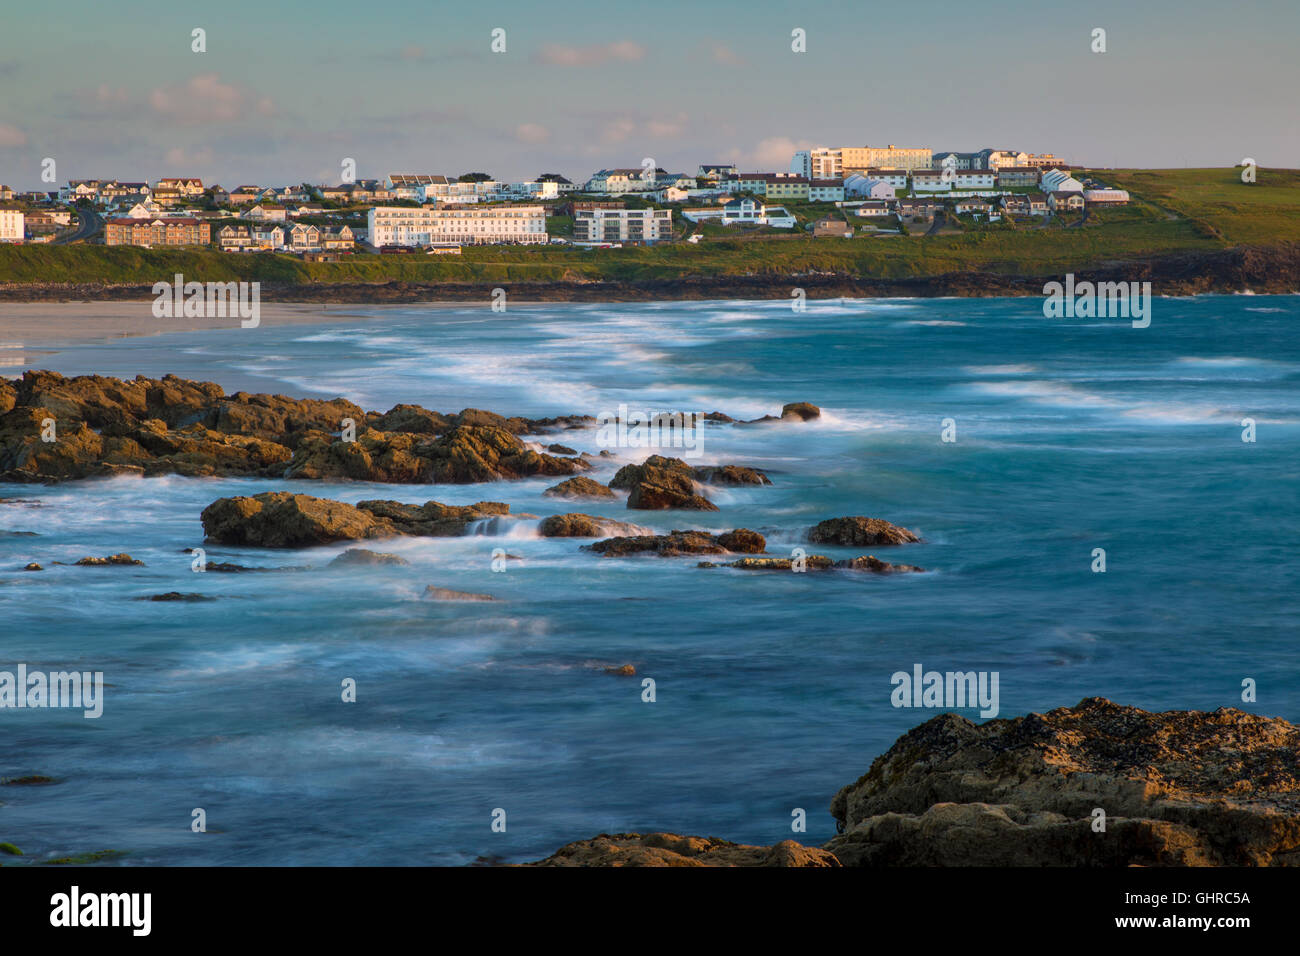 Evening over Fistral Beach and town of Newquay, Cornwall, England Stock Photo